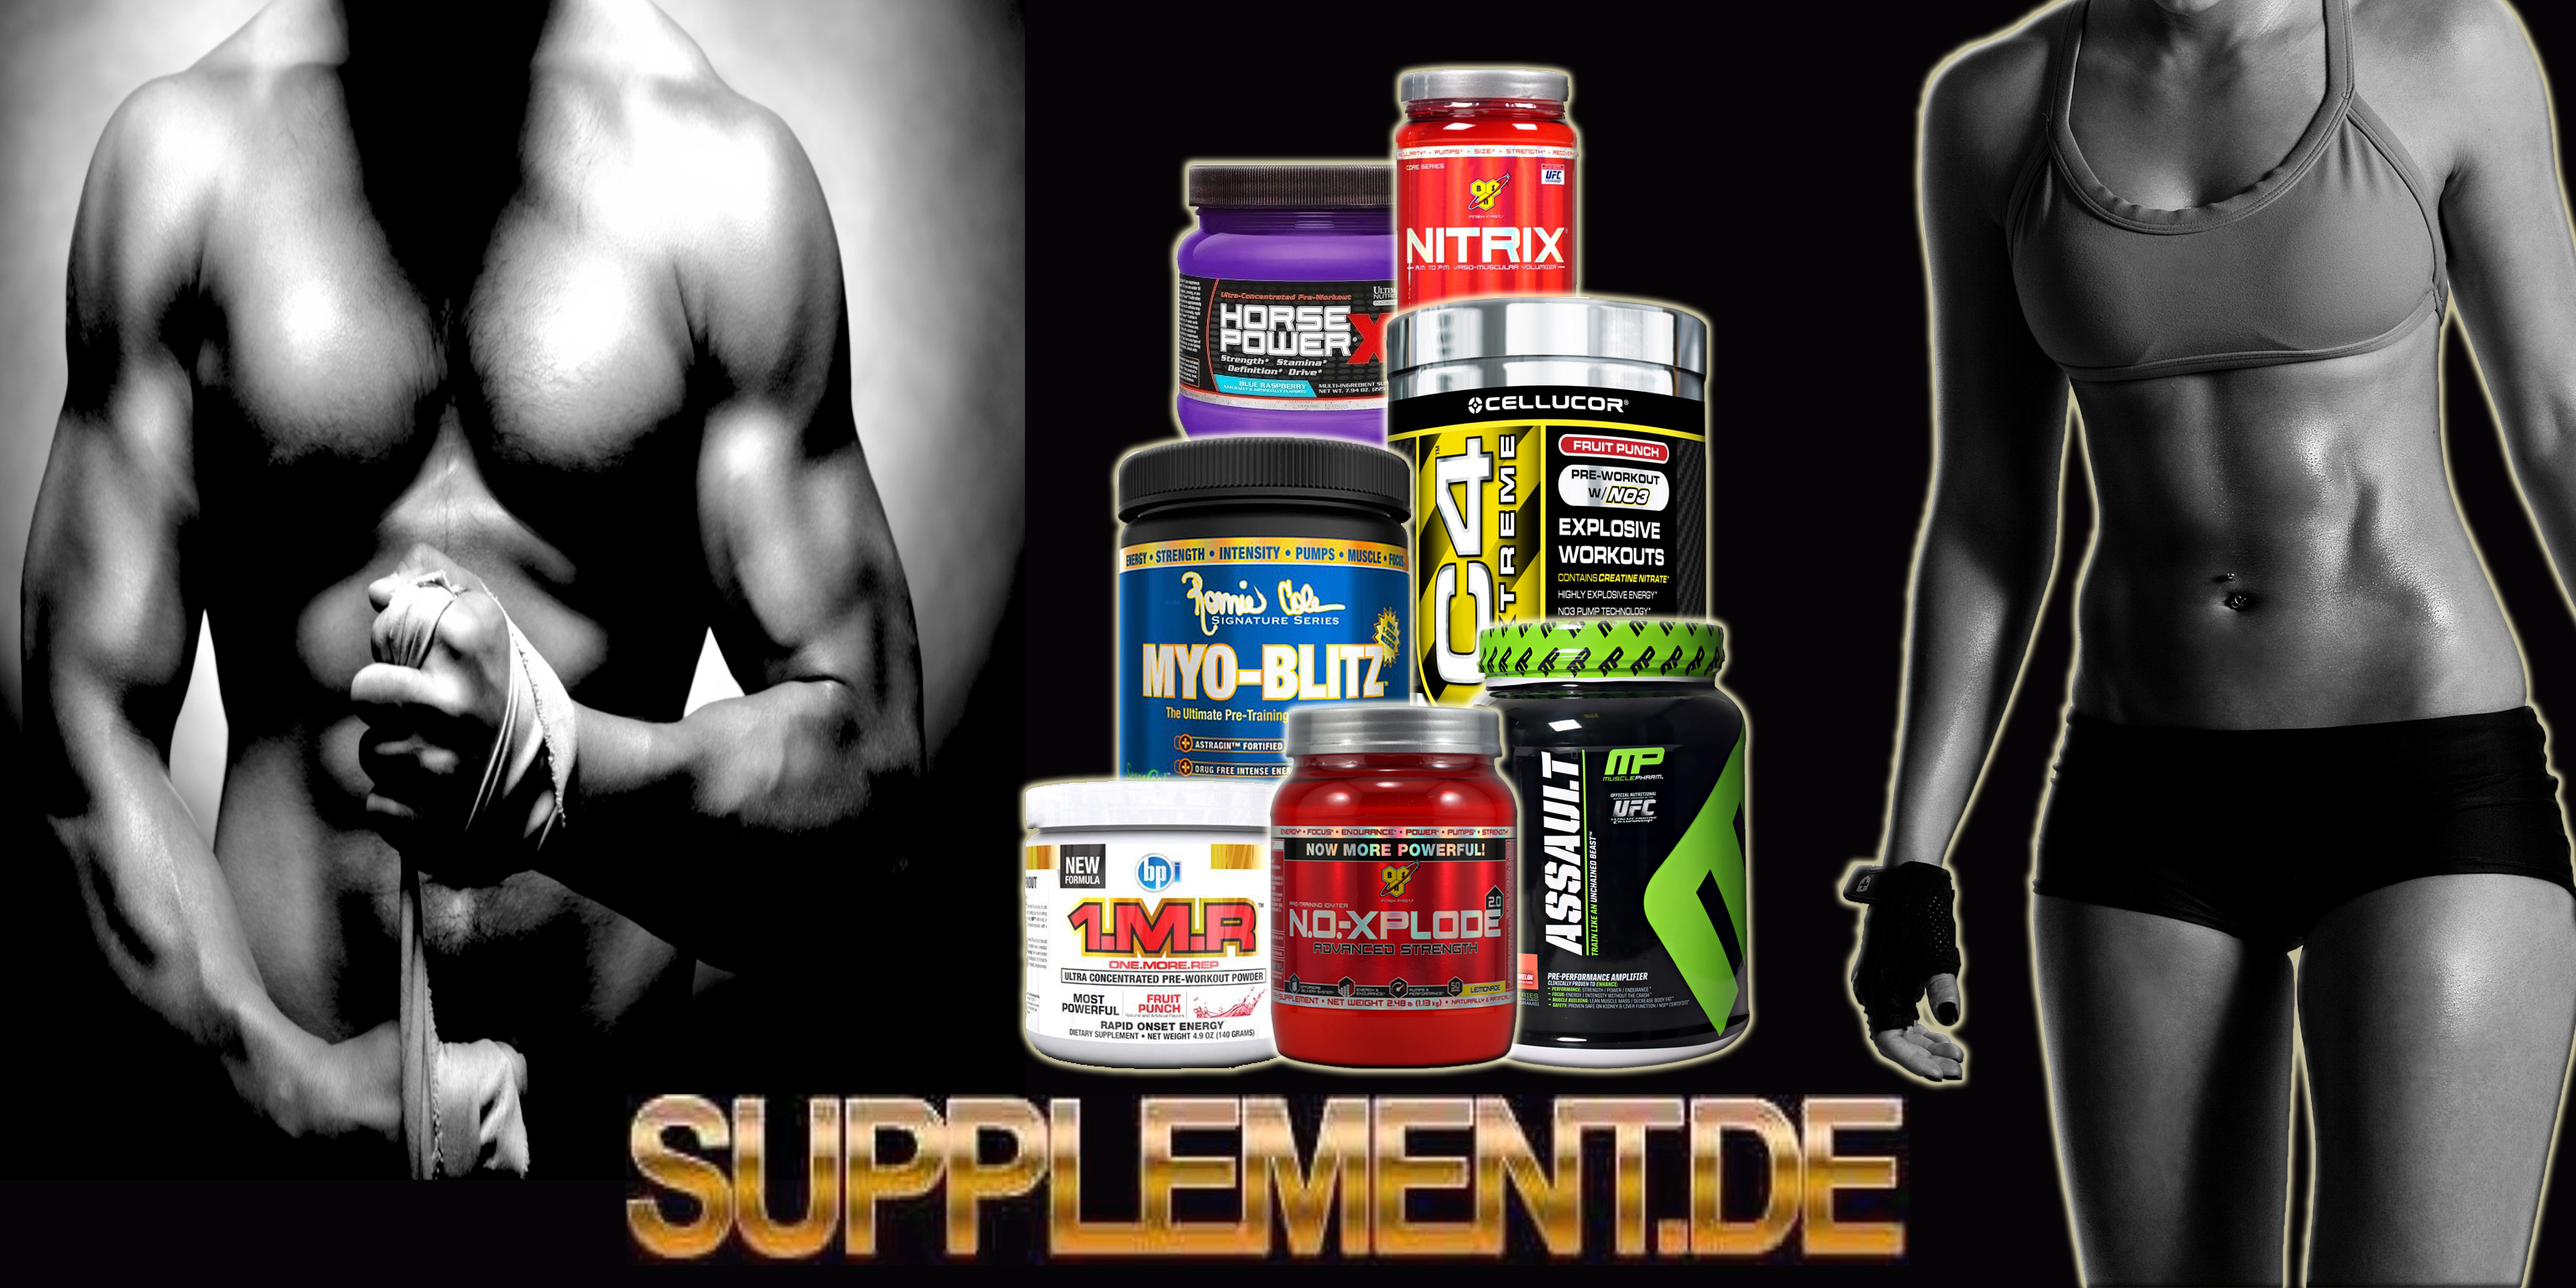 Supplement bodybuilding shop,lose the weight after giving birth,healthy fun...